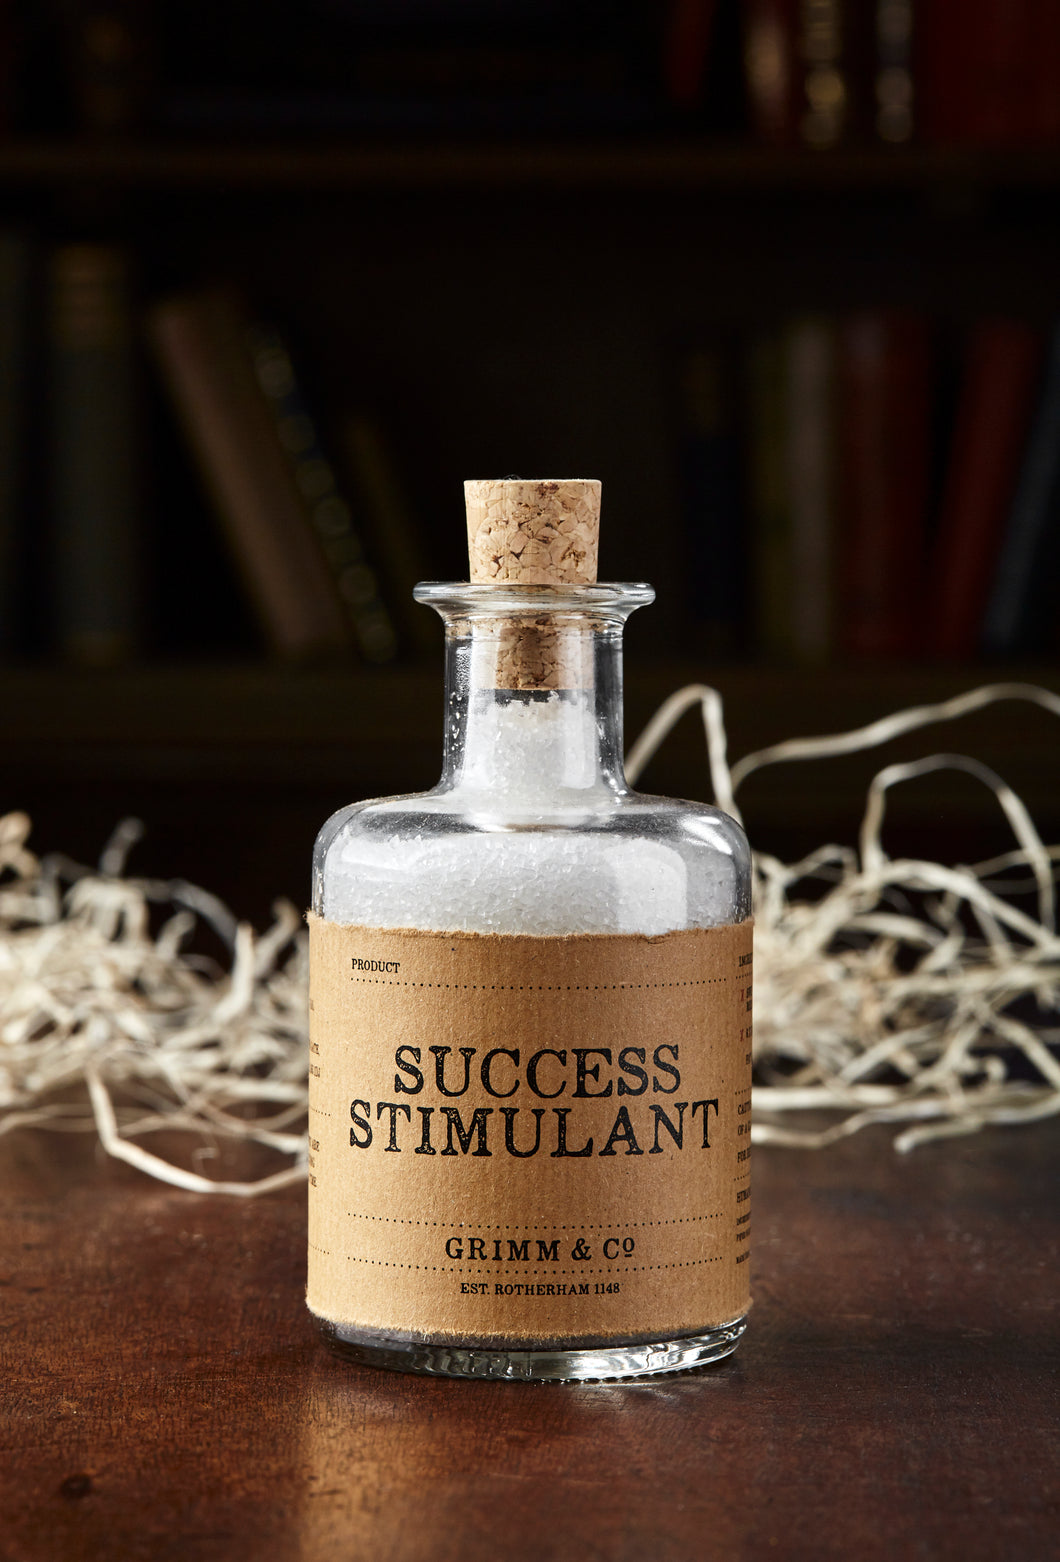 Image shows a bottle of Success Stimulant, otherwise known as white, scented bath salts in a glass bottle with cork lid and a kraft paper label